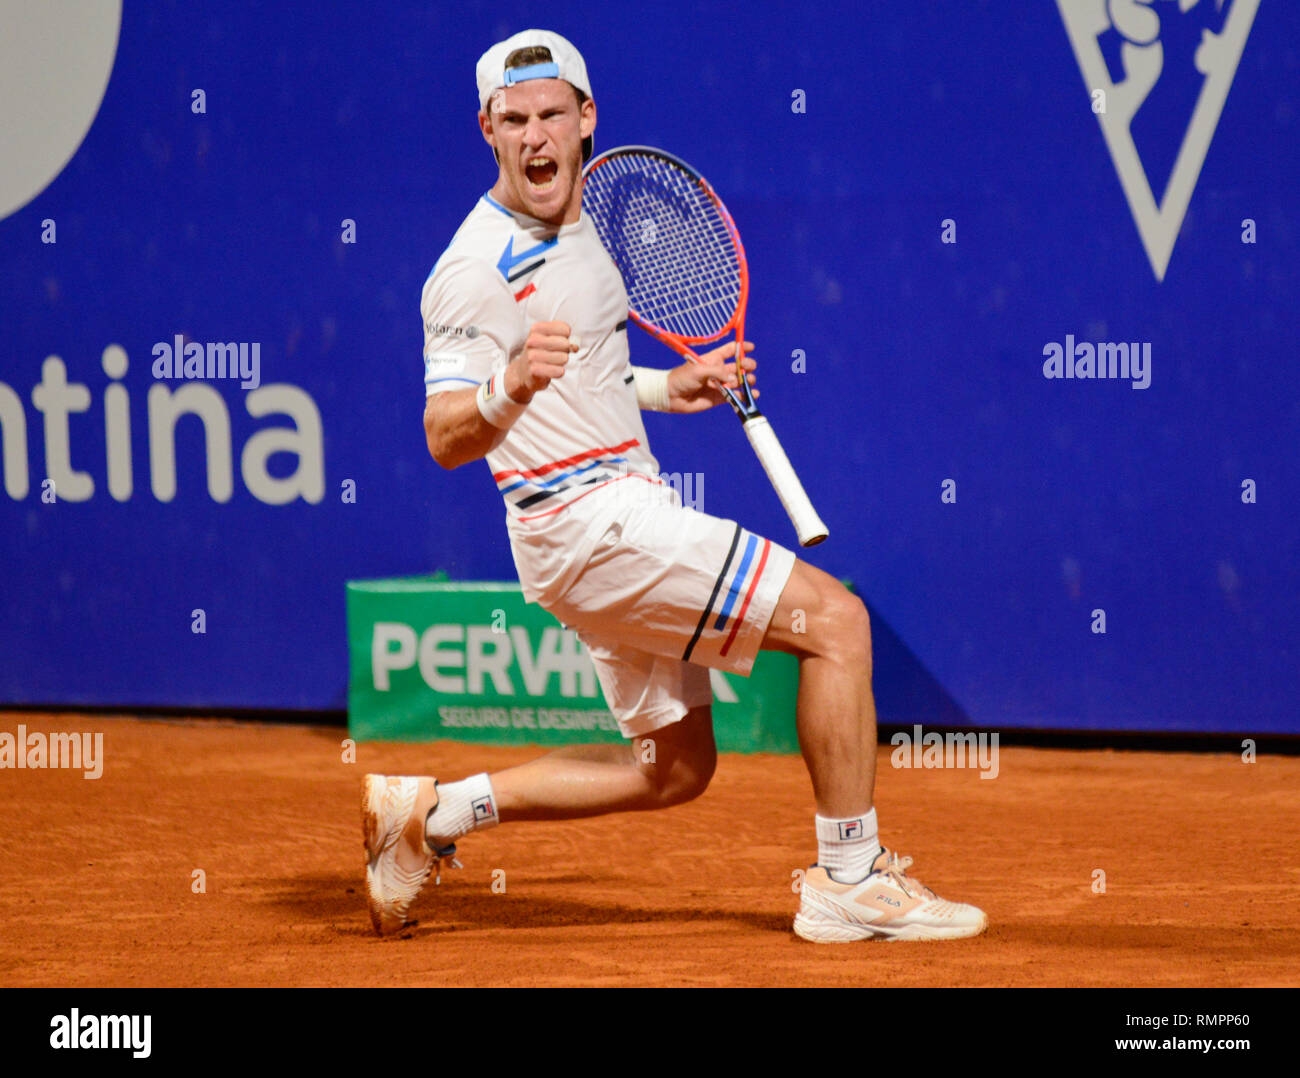 Buenos Aires, Argentina. 15th Feb 2019. Local favourite Diego Schwartzman  (Argentina) advances to the semifinals of the Argentina Open, an ATP 250  tennis tournament. Credit: Mariano Garcia/Alamy Live News Stock Photo -  Alamy